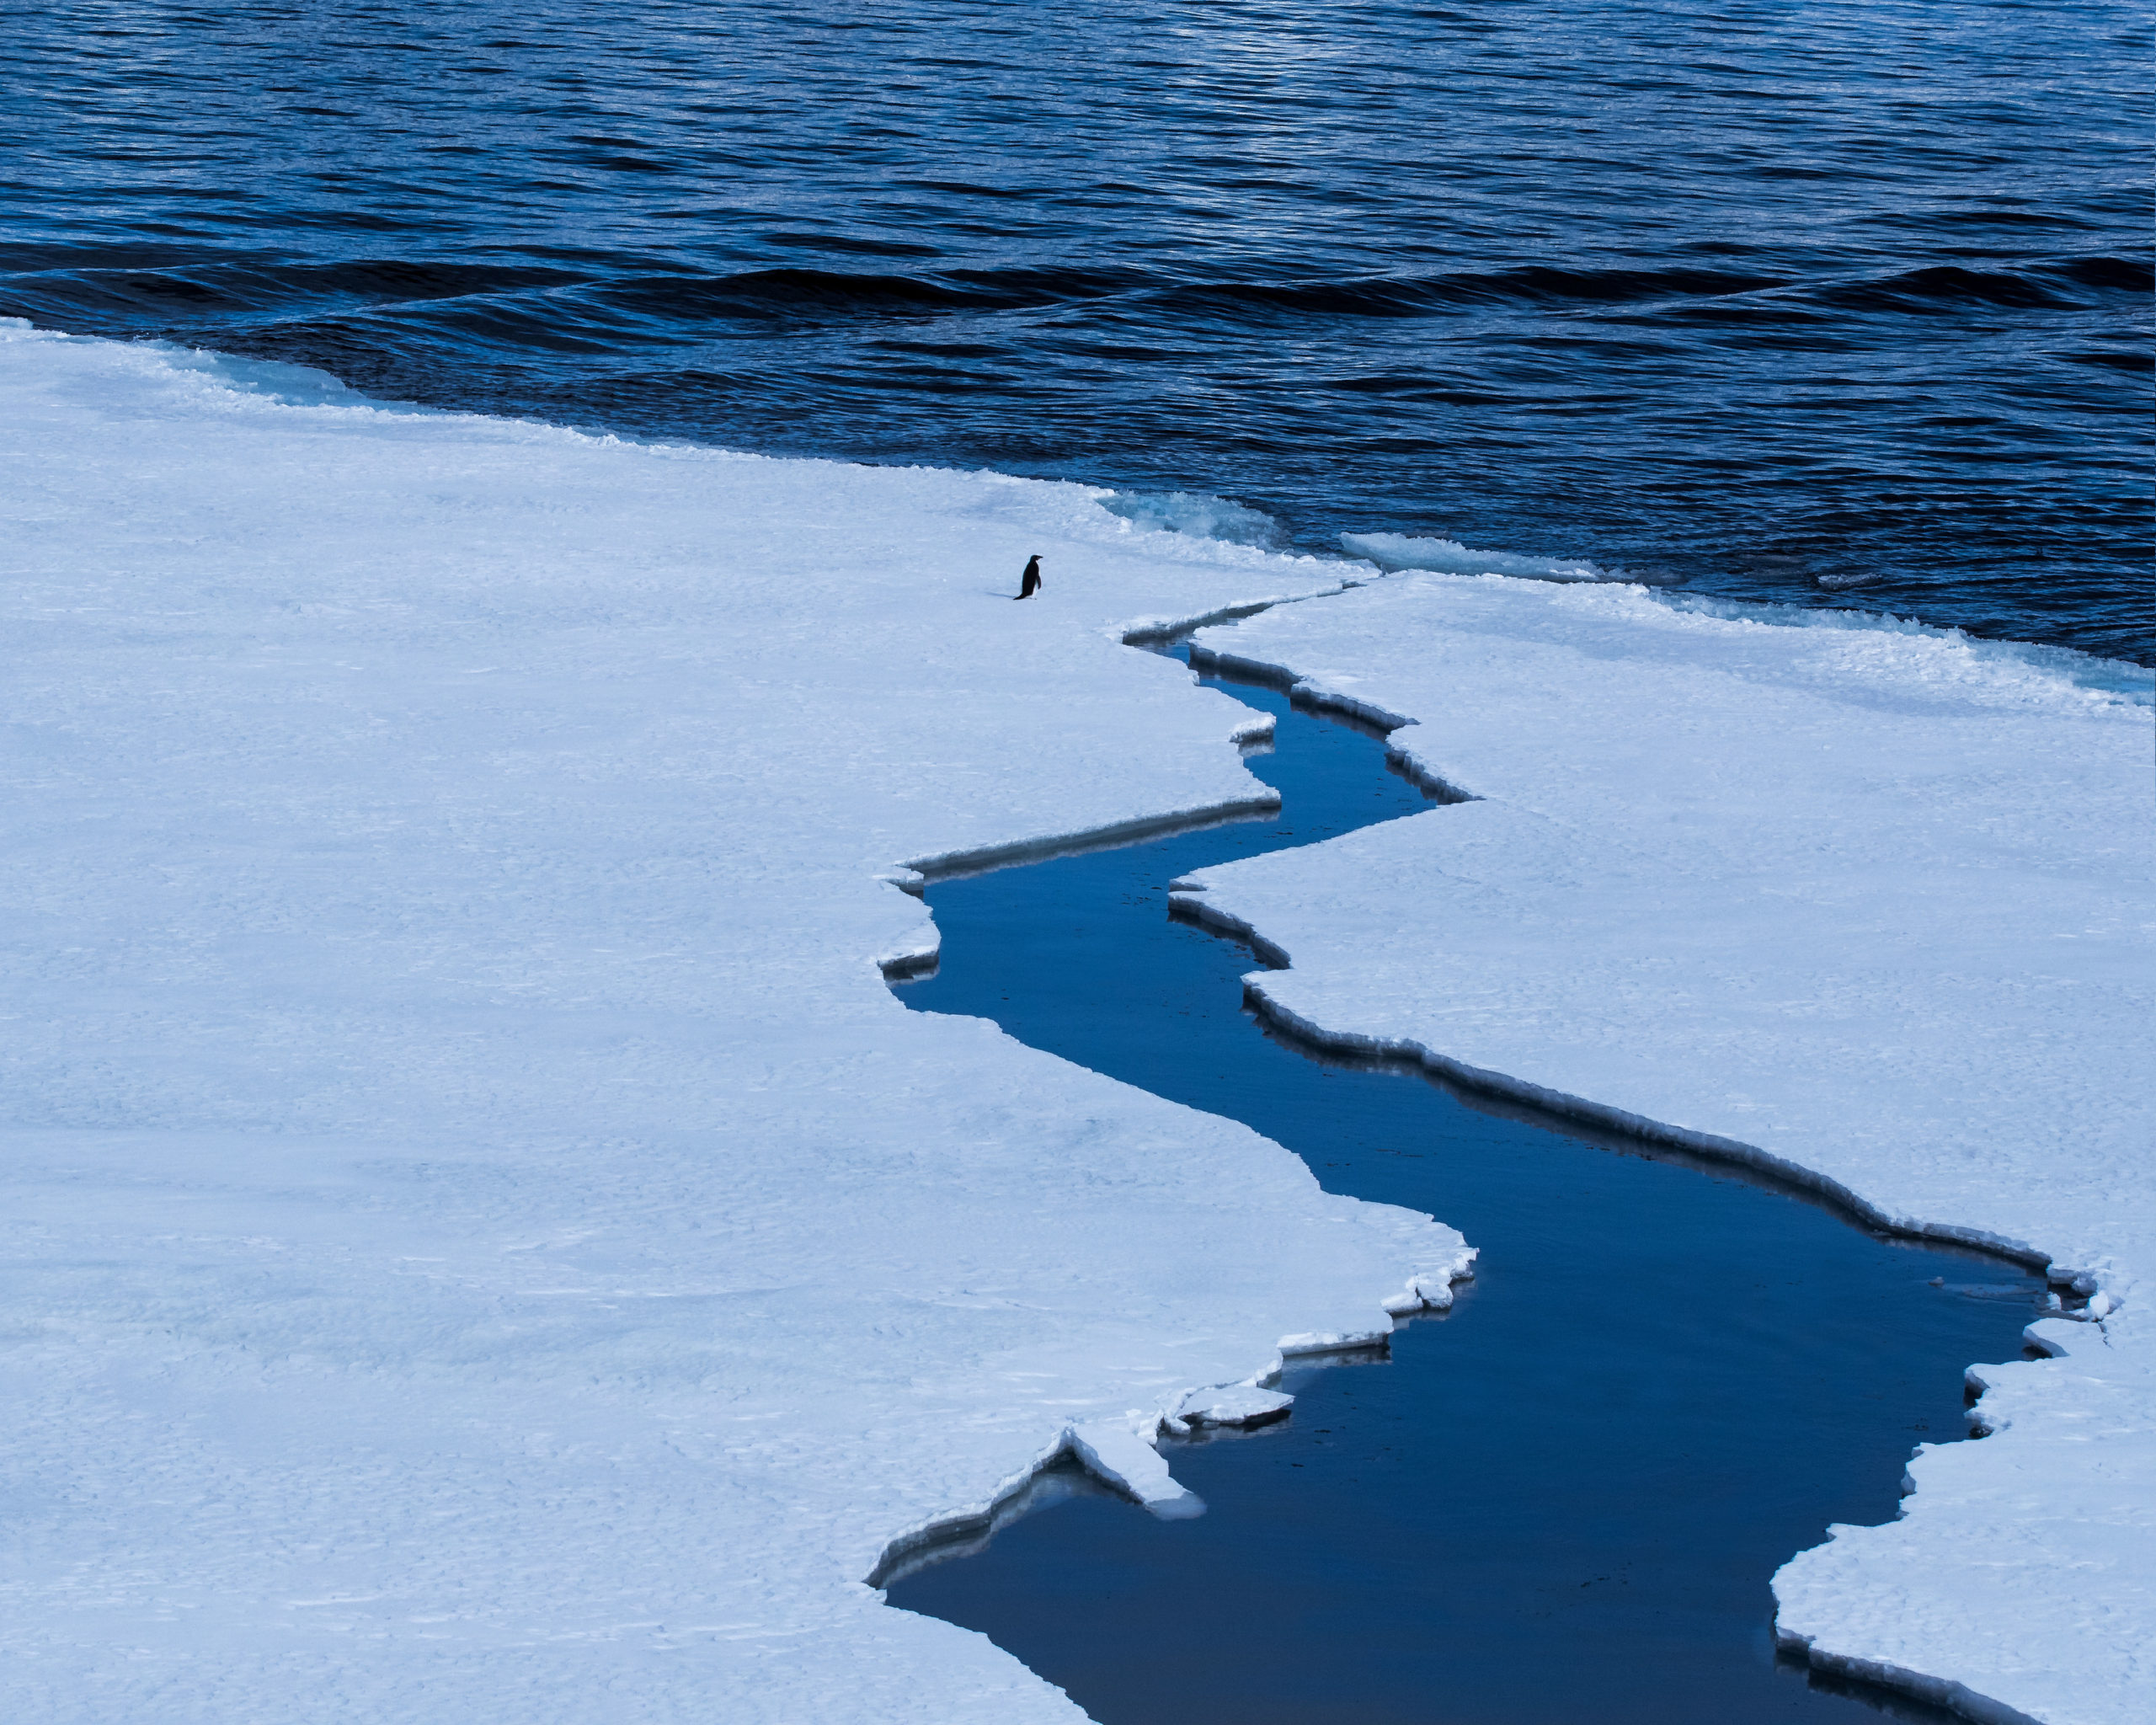 Photography of an adeli penguin standing on ice floating in the Weddell sea, Antarctica